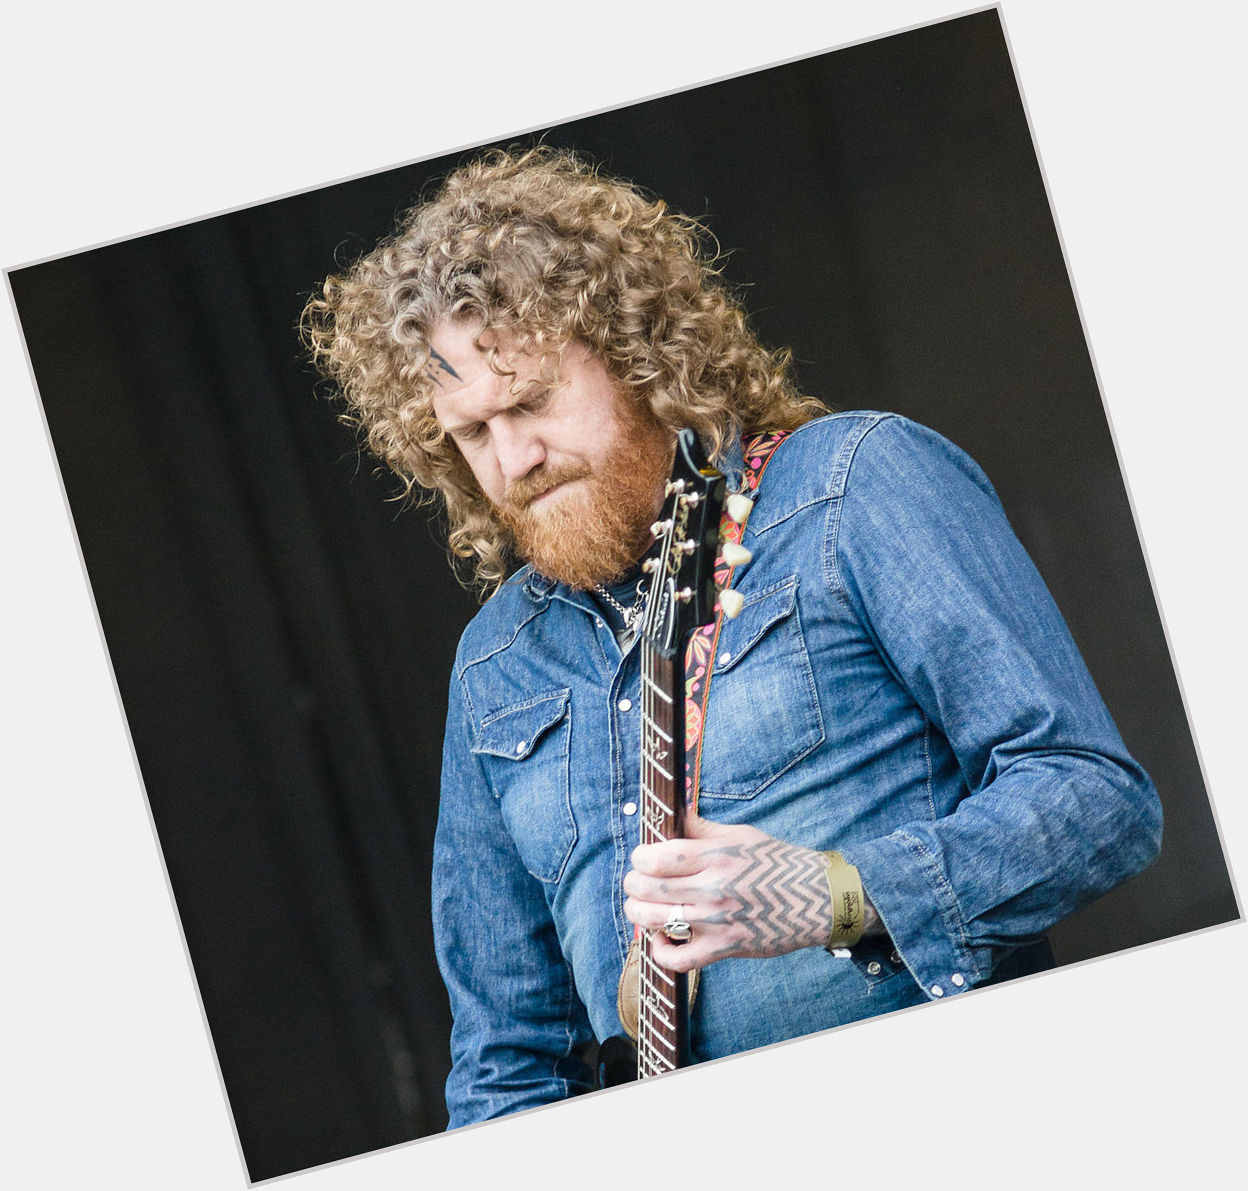 Happy birthday to Brent Hinds of 